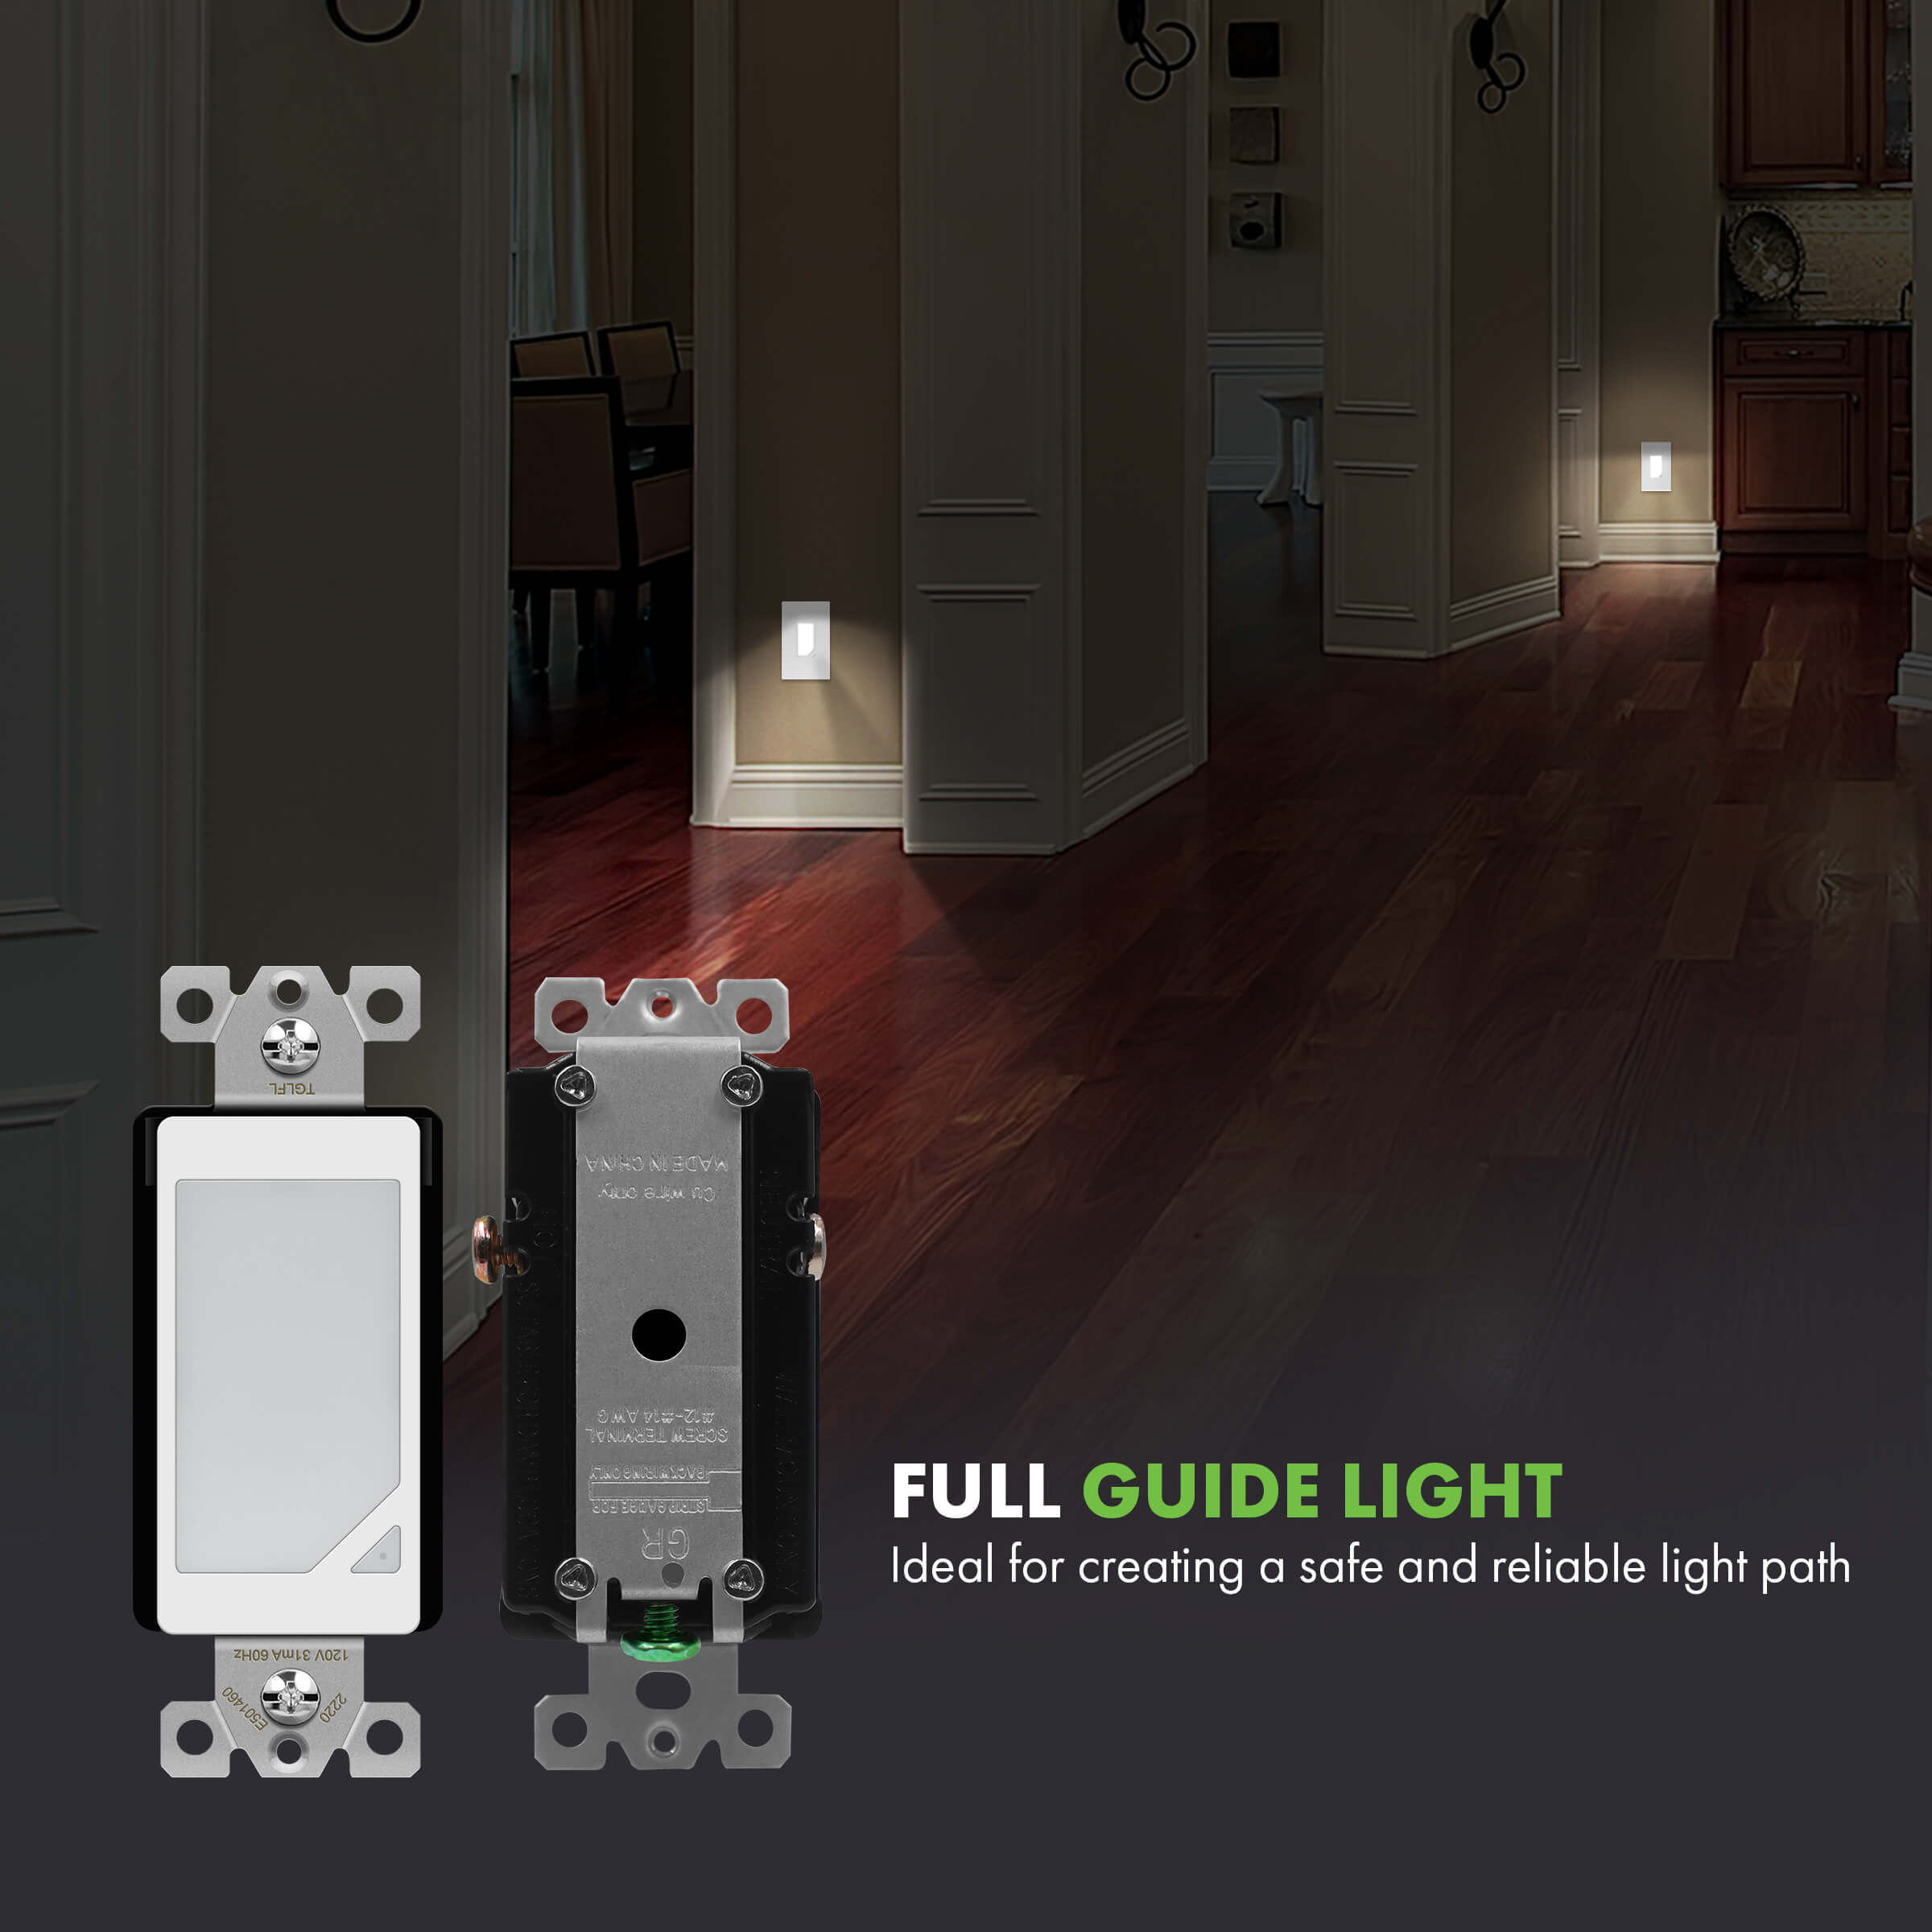 TOPGREENER Full Face LED Decorator Guide Light with Automatic Daylight Sensor